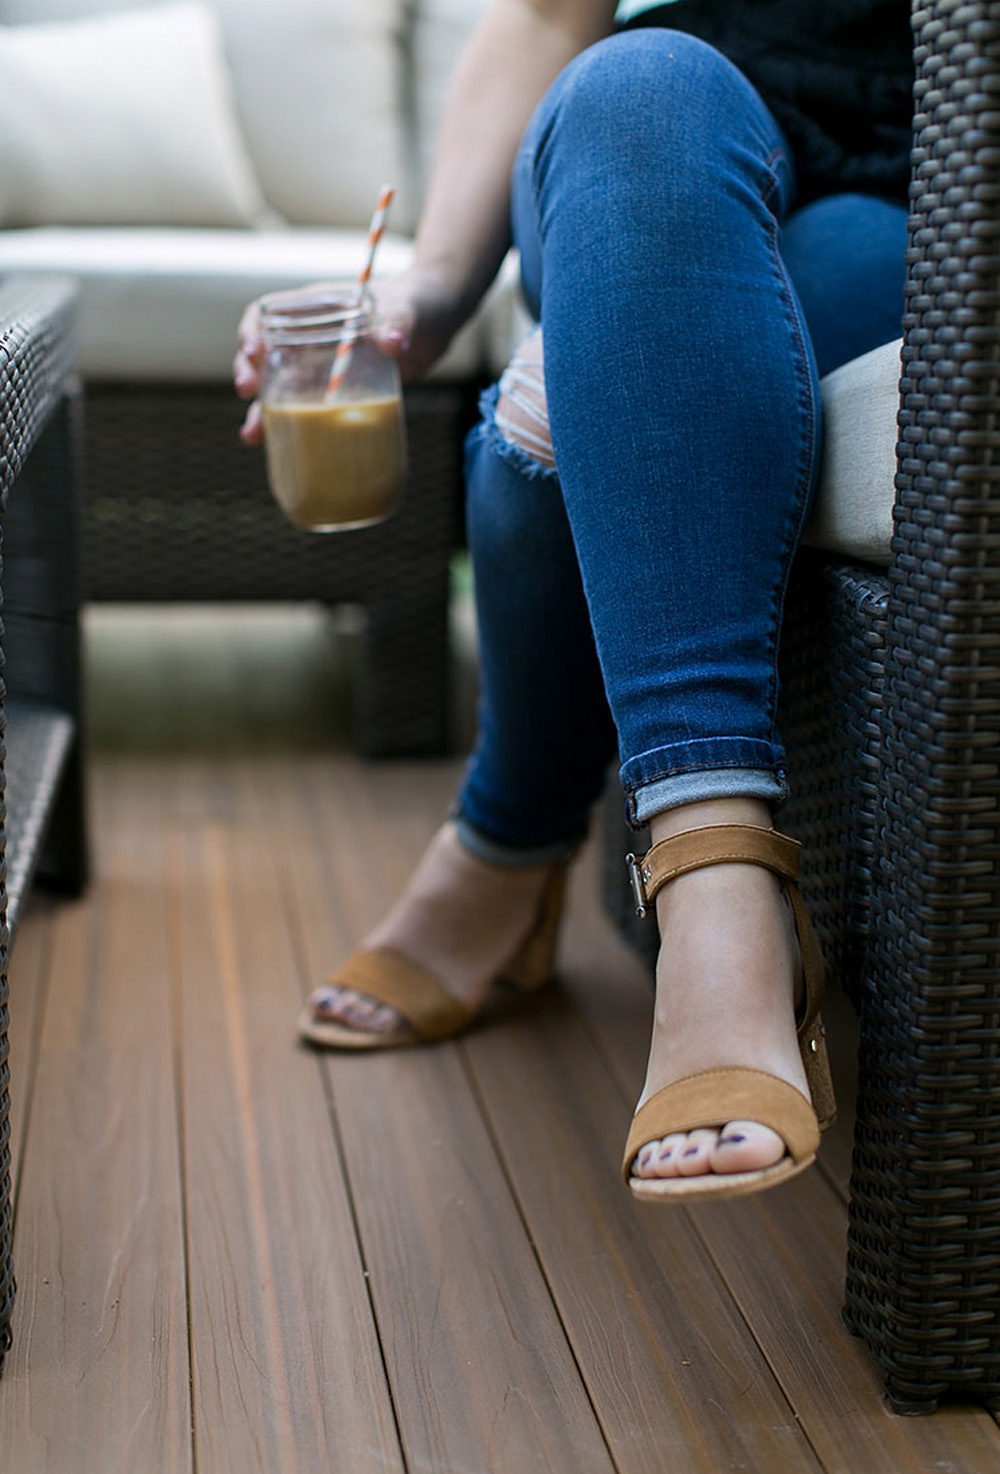 A person wearing jeans and sandals sits on a patio with a drink. 